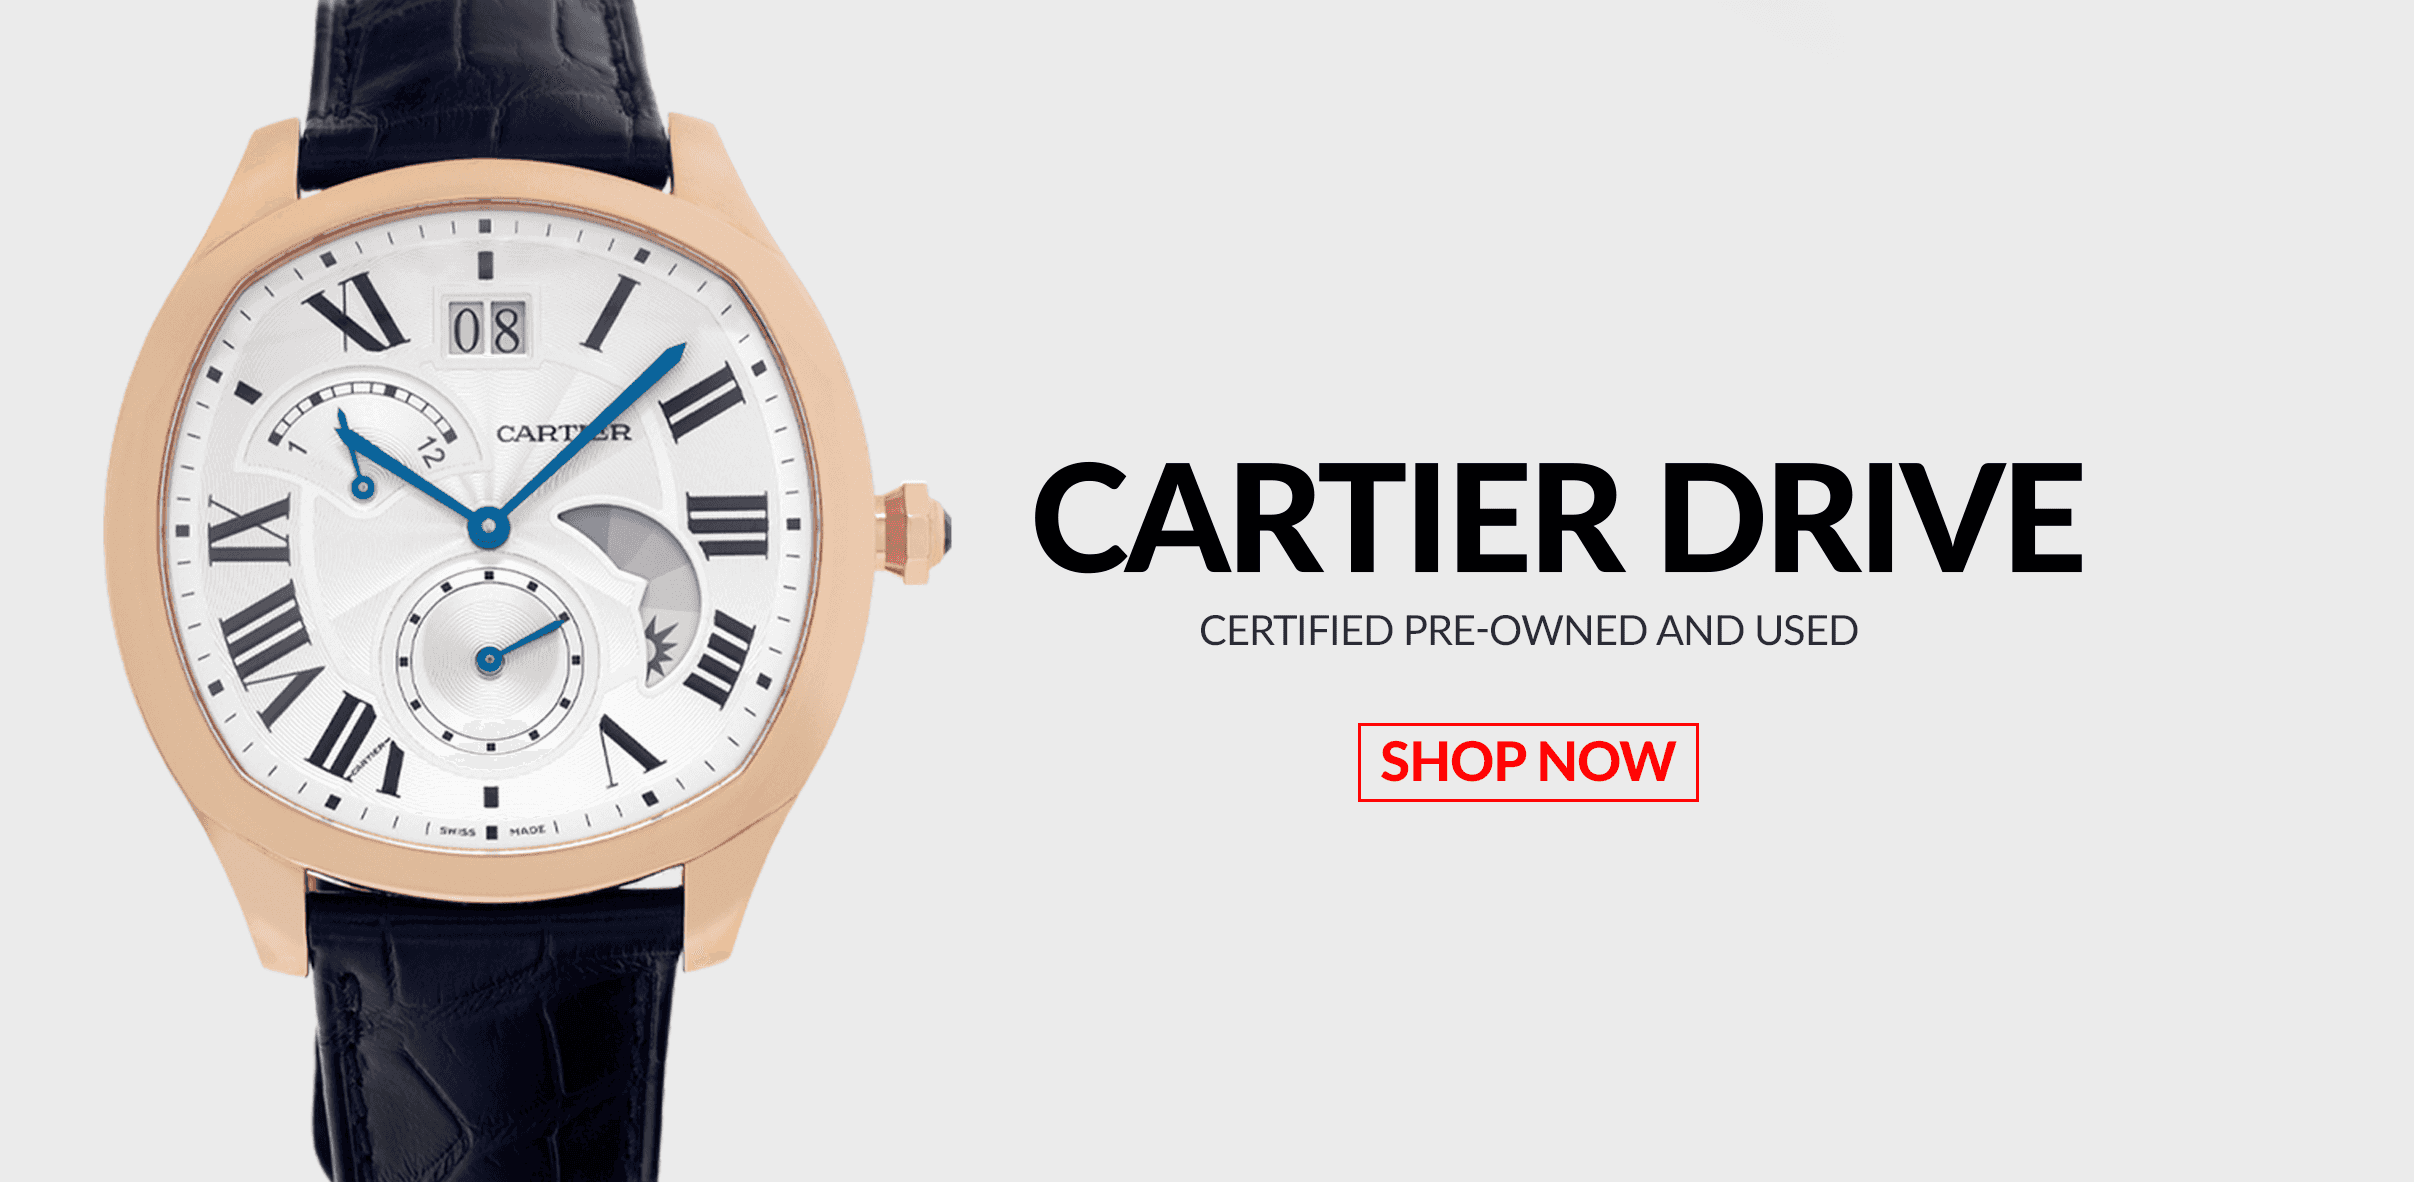 Pre-Owned Certified Used Cartier Drive Header